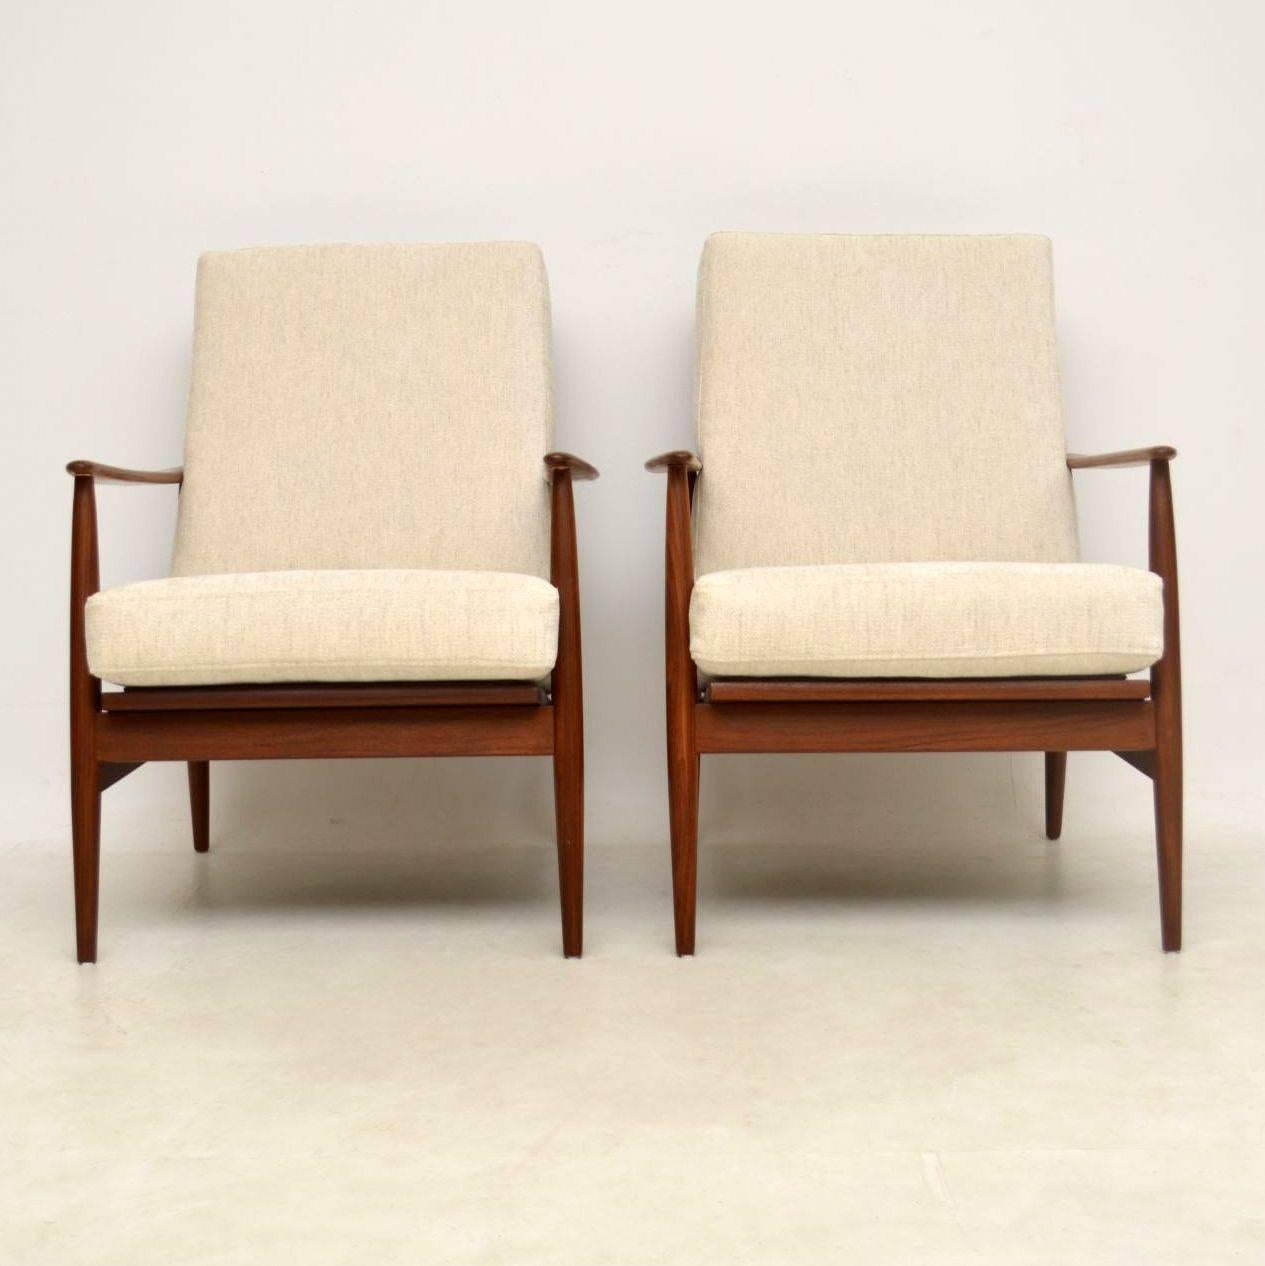 A beautiful pair of vintage armchairs in solid Walnut, these date from the 1960s. They are in the classic Scandinavian style, and they’re of great quality. The condition is superb for their age, the frames are nicely polished with lovely grain